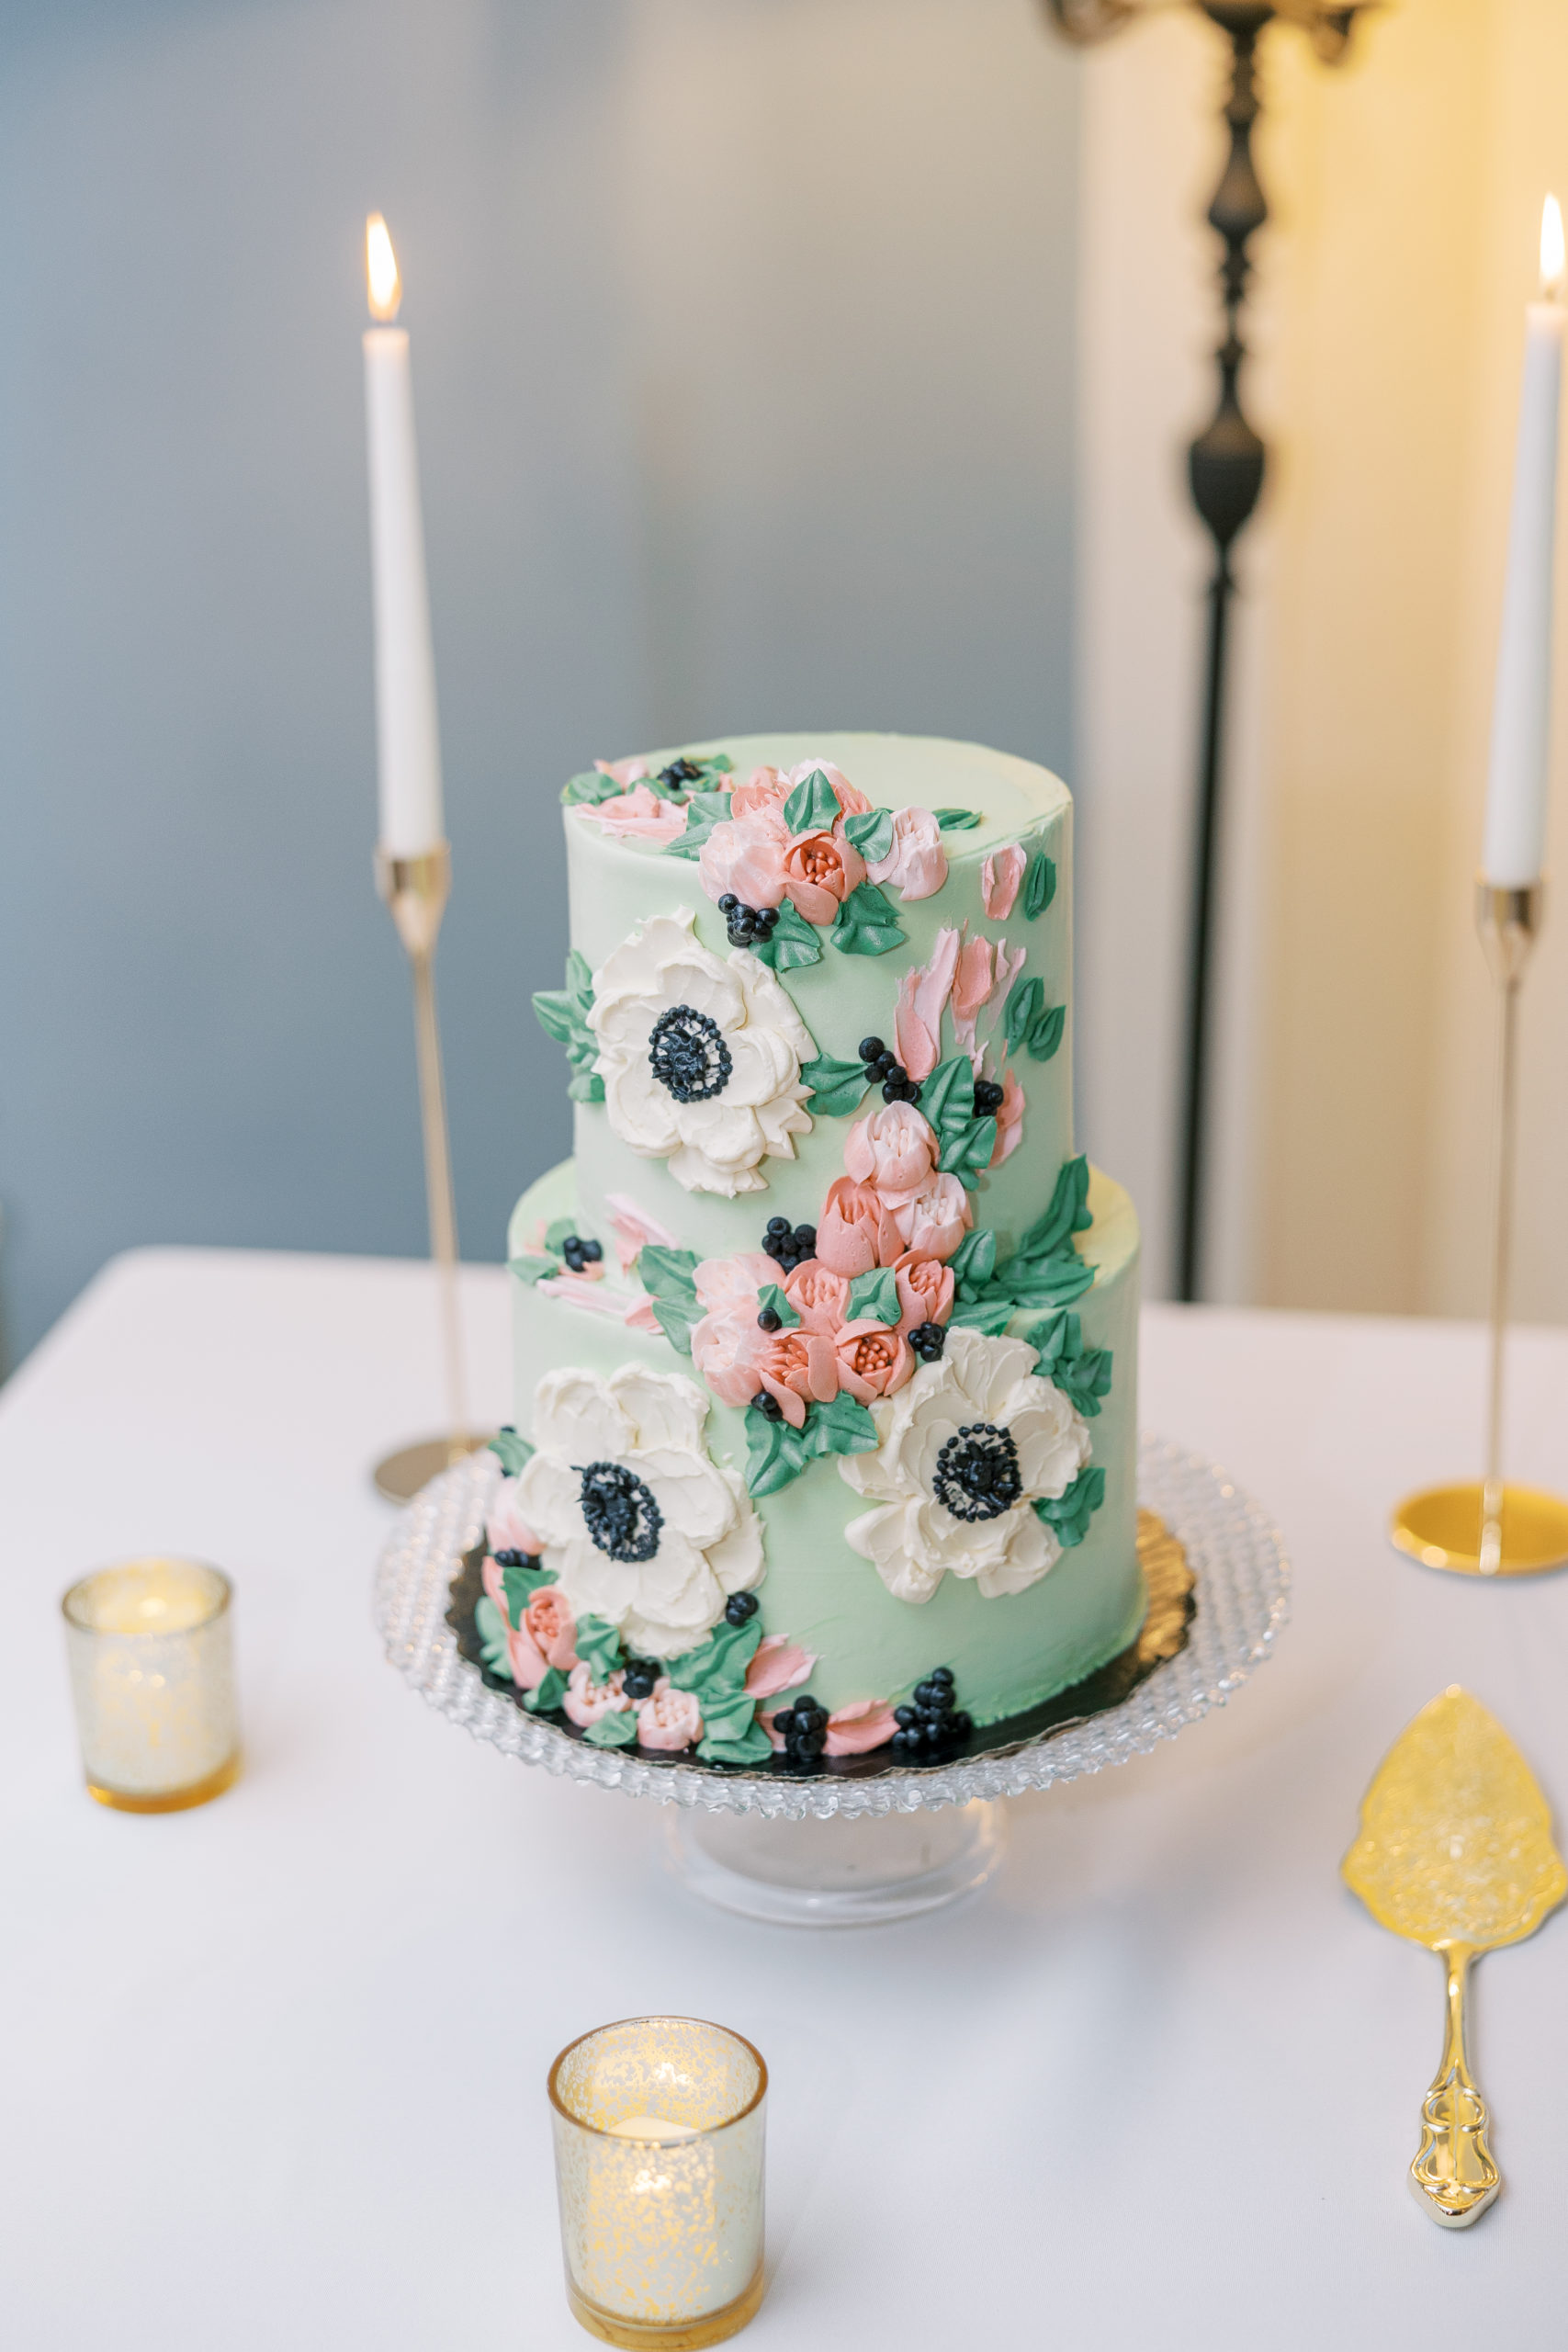 Green 2-tiered wedding cake with cream and pink flowers made of icing with gold candle holders and cake knife 